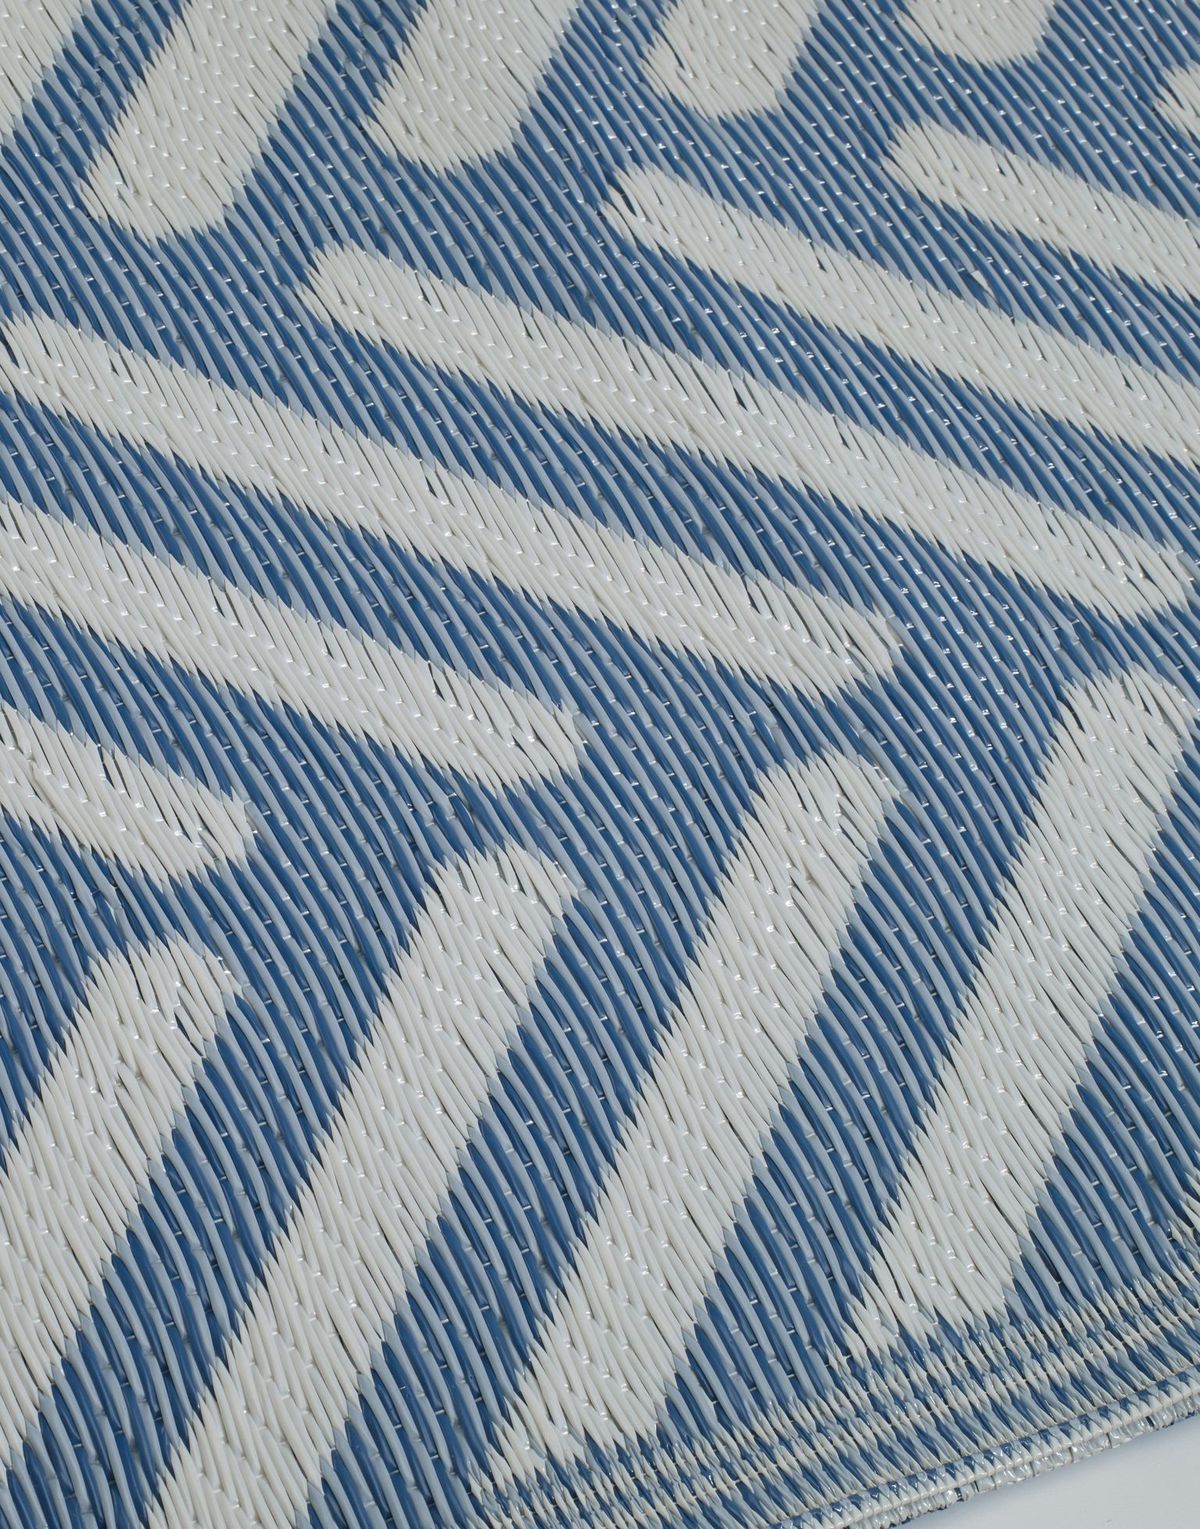 FH Home Outdoor Rug - Waterproof, Fade Resistant, Reversible - Premium Recycled Plastic - Herringbone - Large Patio, Deck, Sunroom, RV, Camping - Fresno - Light Blue - 9 x 12 ft Foldable - image 4 of 7